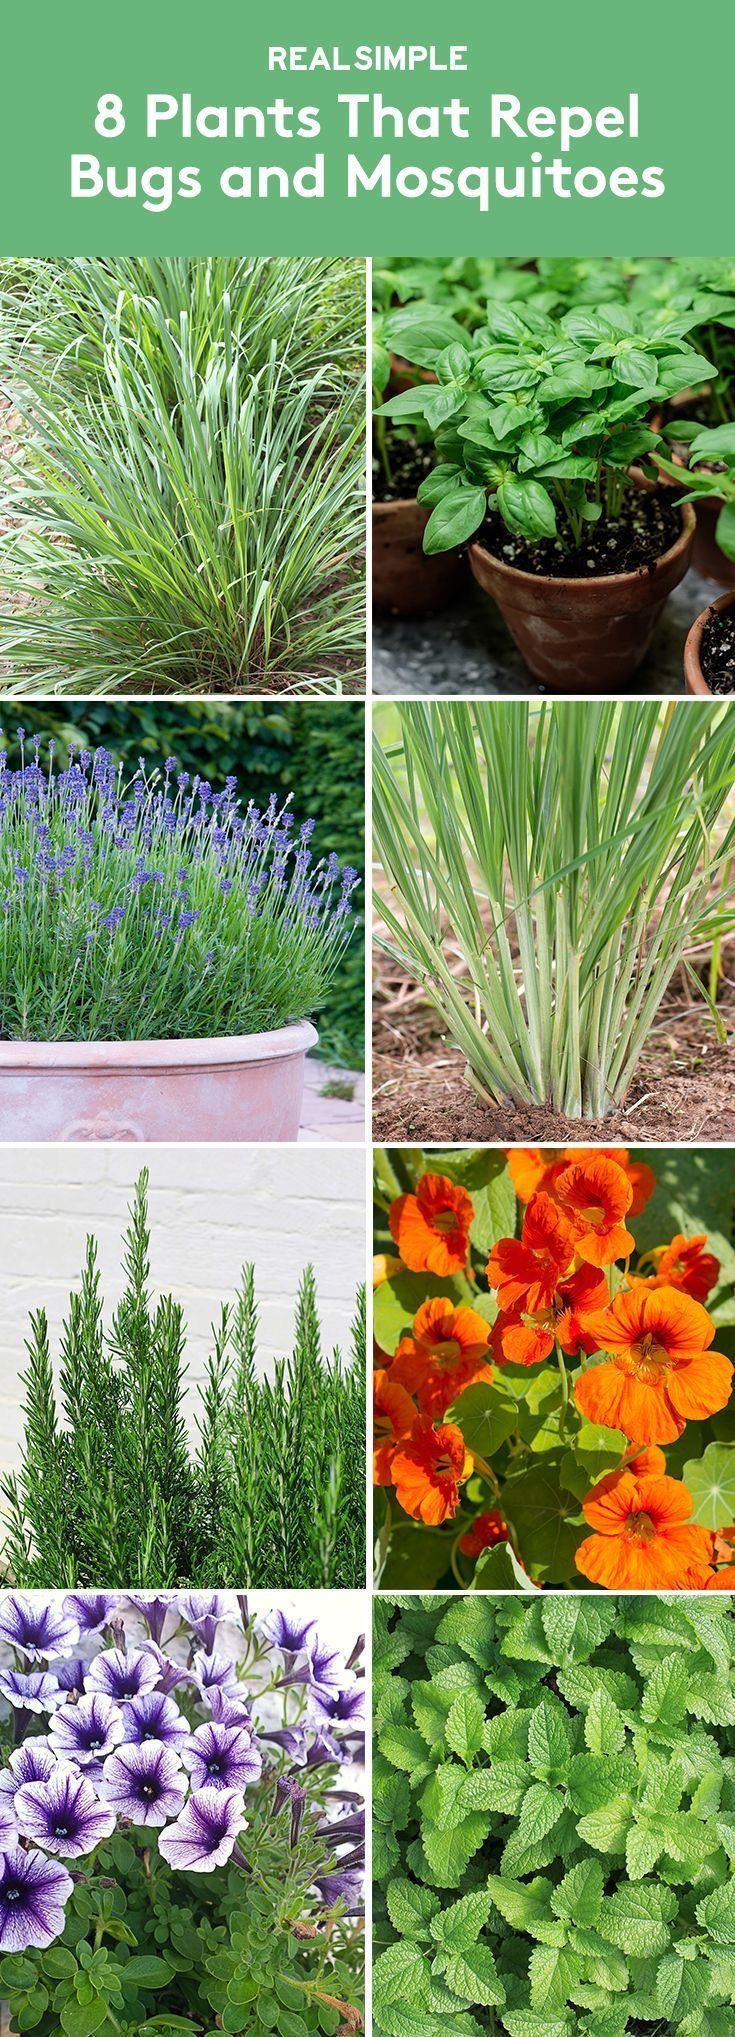 8 Plants That Repel Bugs and Mosquitoes -   17 plants That Repel Mosquitos people ideas